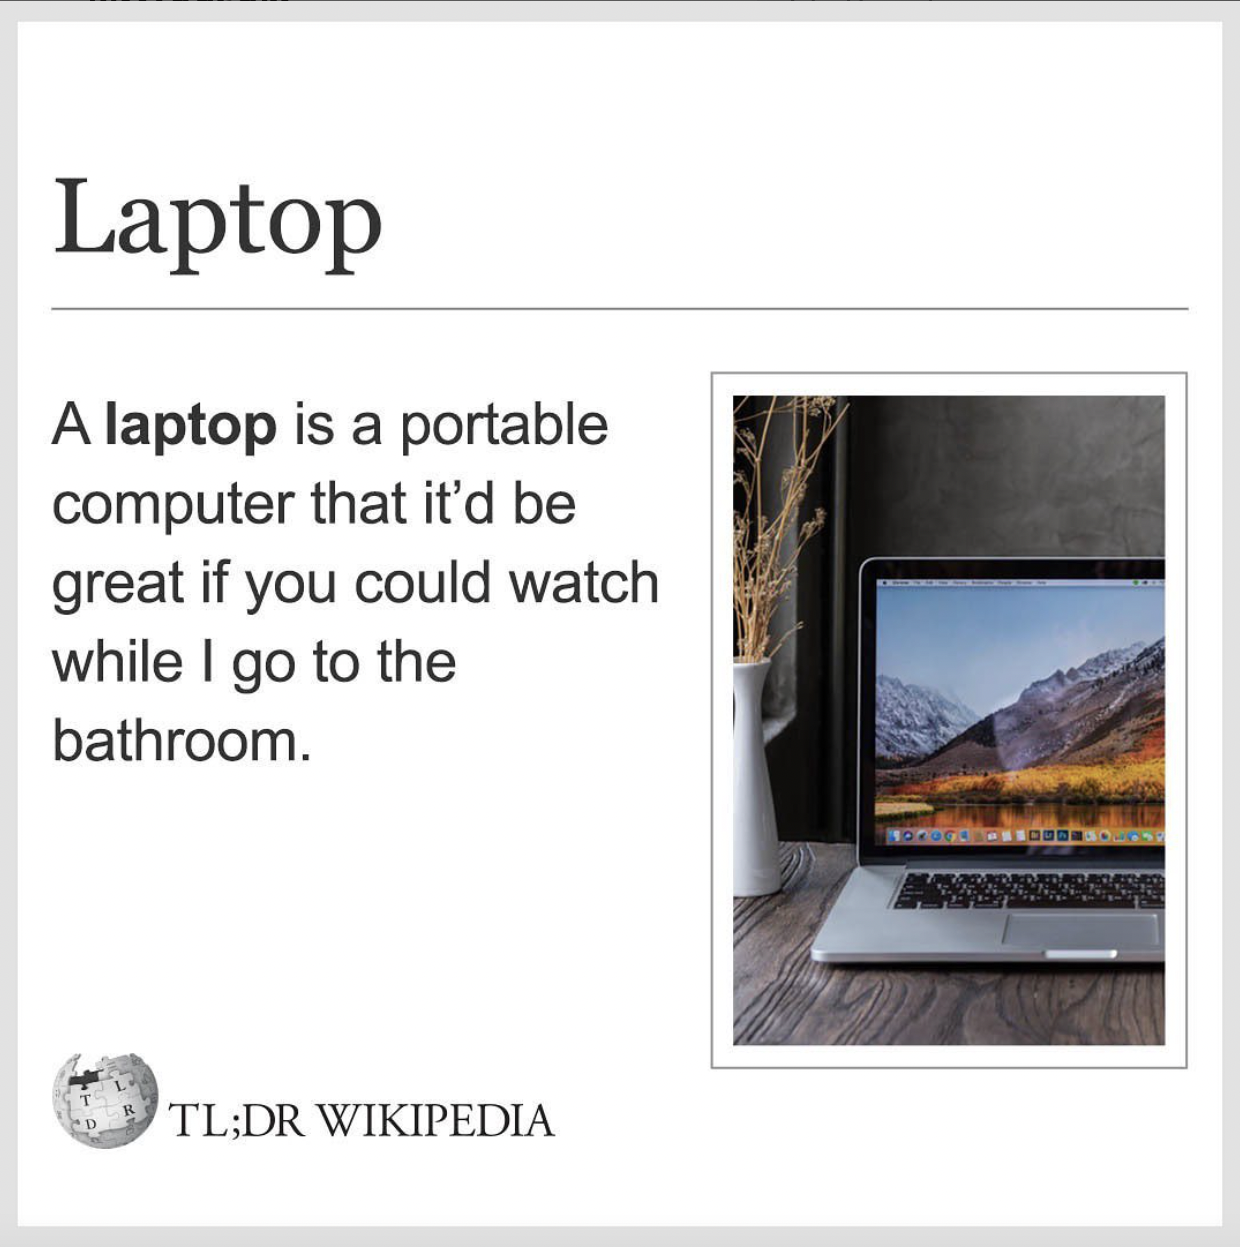 Wikipedia Memes - multimedia - Laptop A laptop is a portable computer that it'd be great if you could watch while I go to the bathroom. Tl;Dr Wikipedia